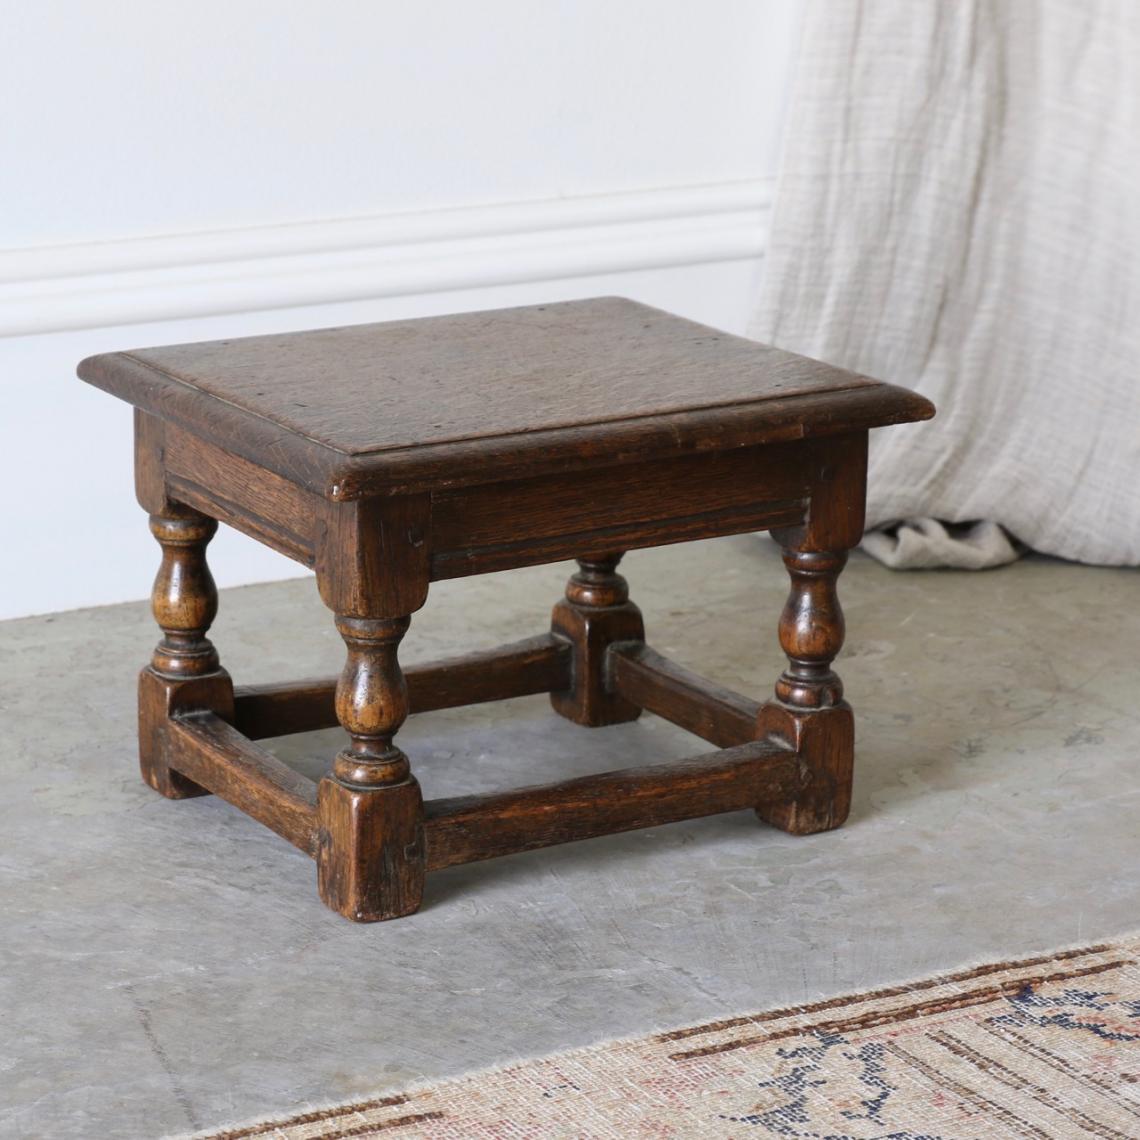 Miniature Jointed Stool